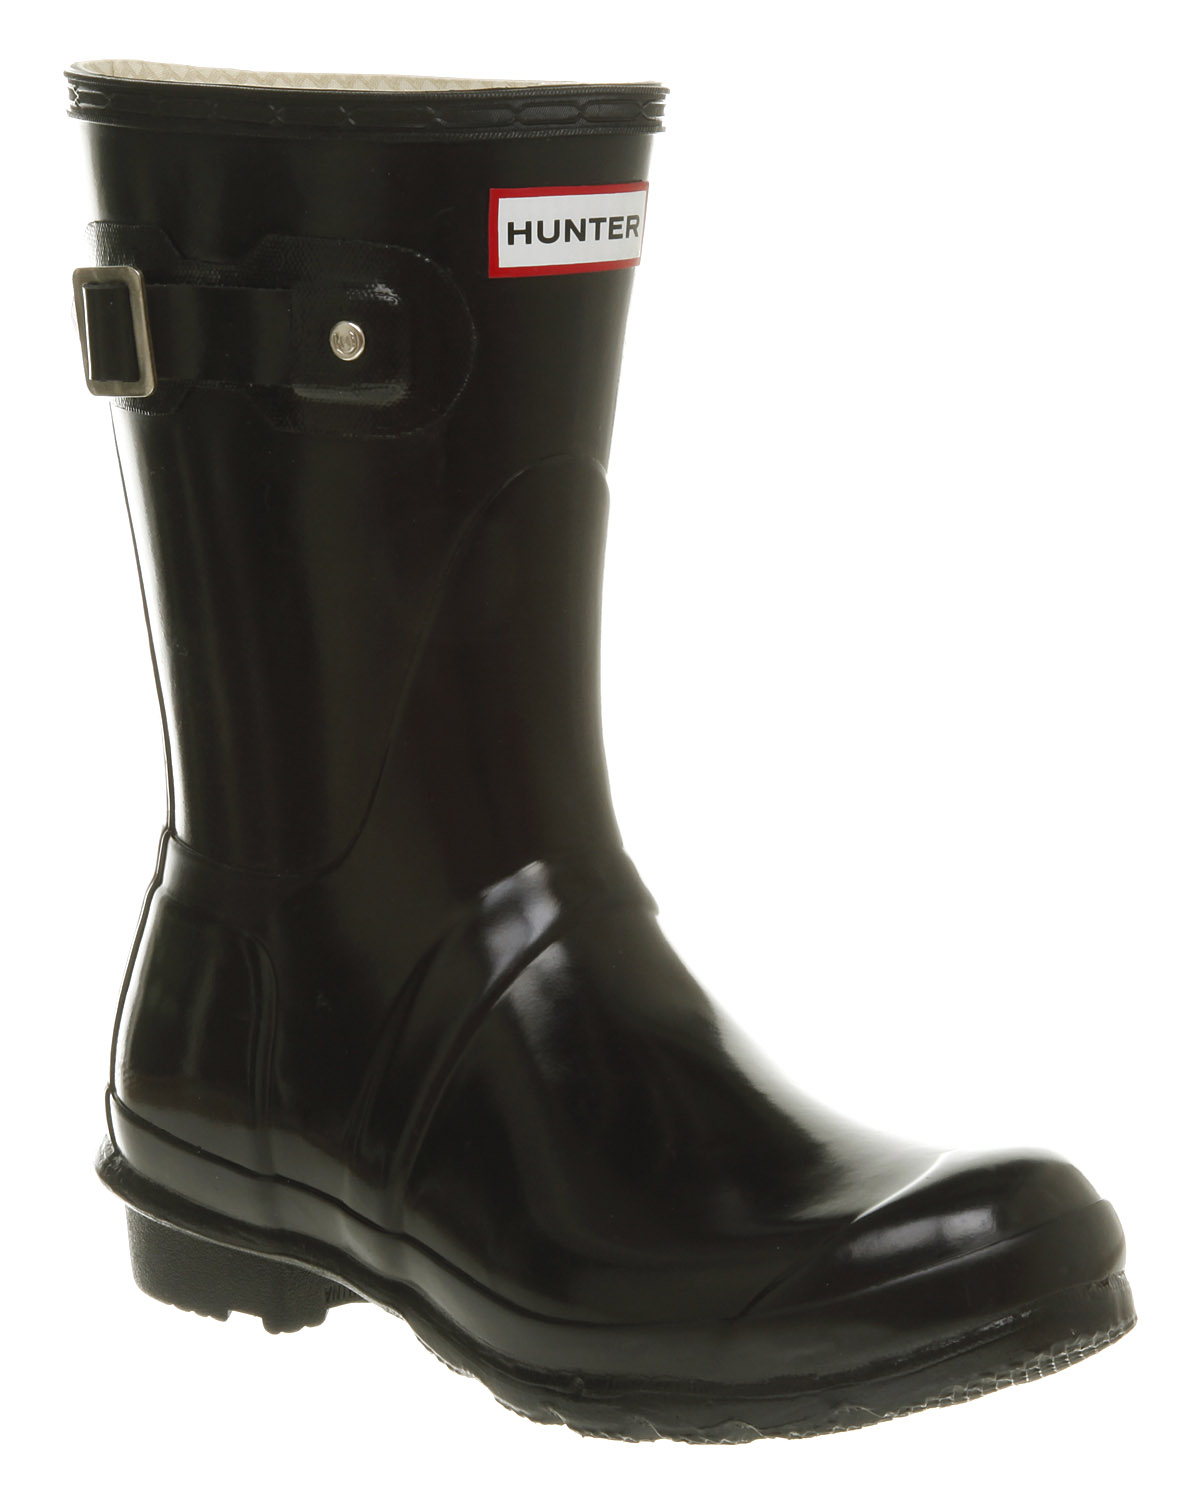 Lyst - Hunter Short Classic Wellies in Black - Save 3%